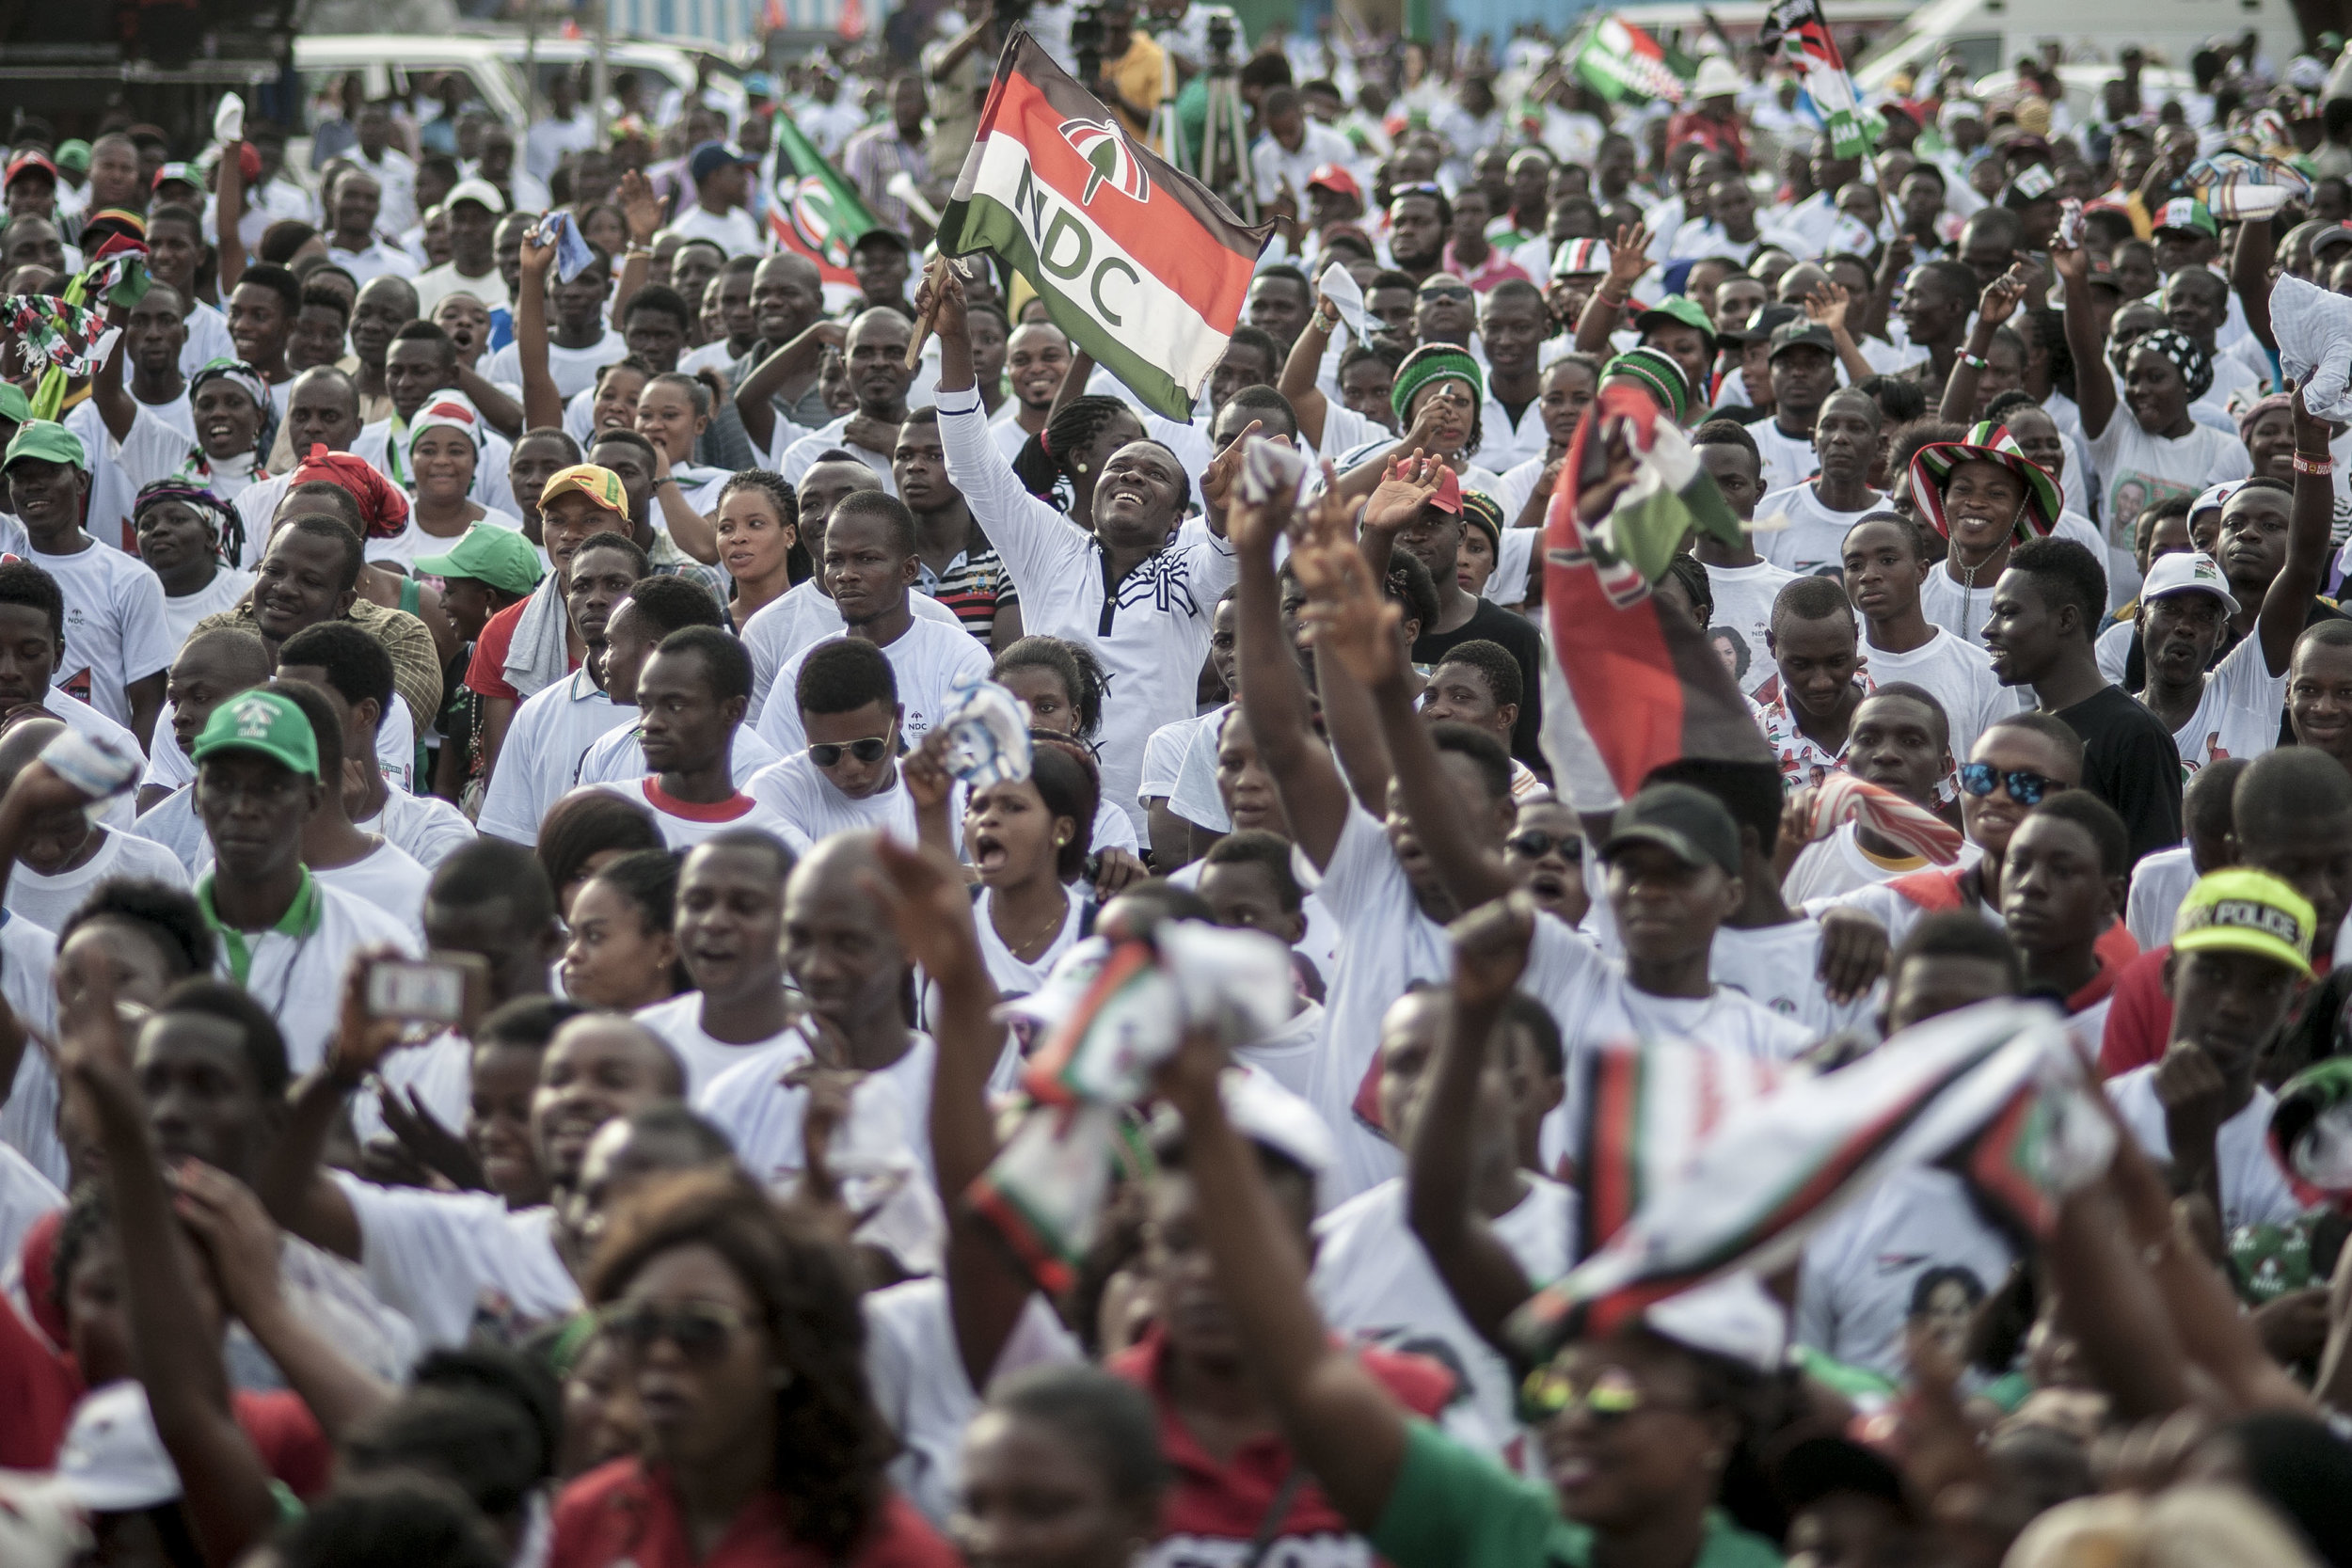  John Dramani Mahama's NDC supporters during a rally in Tema town Accra 